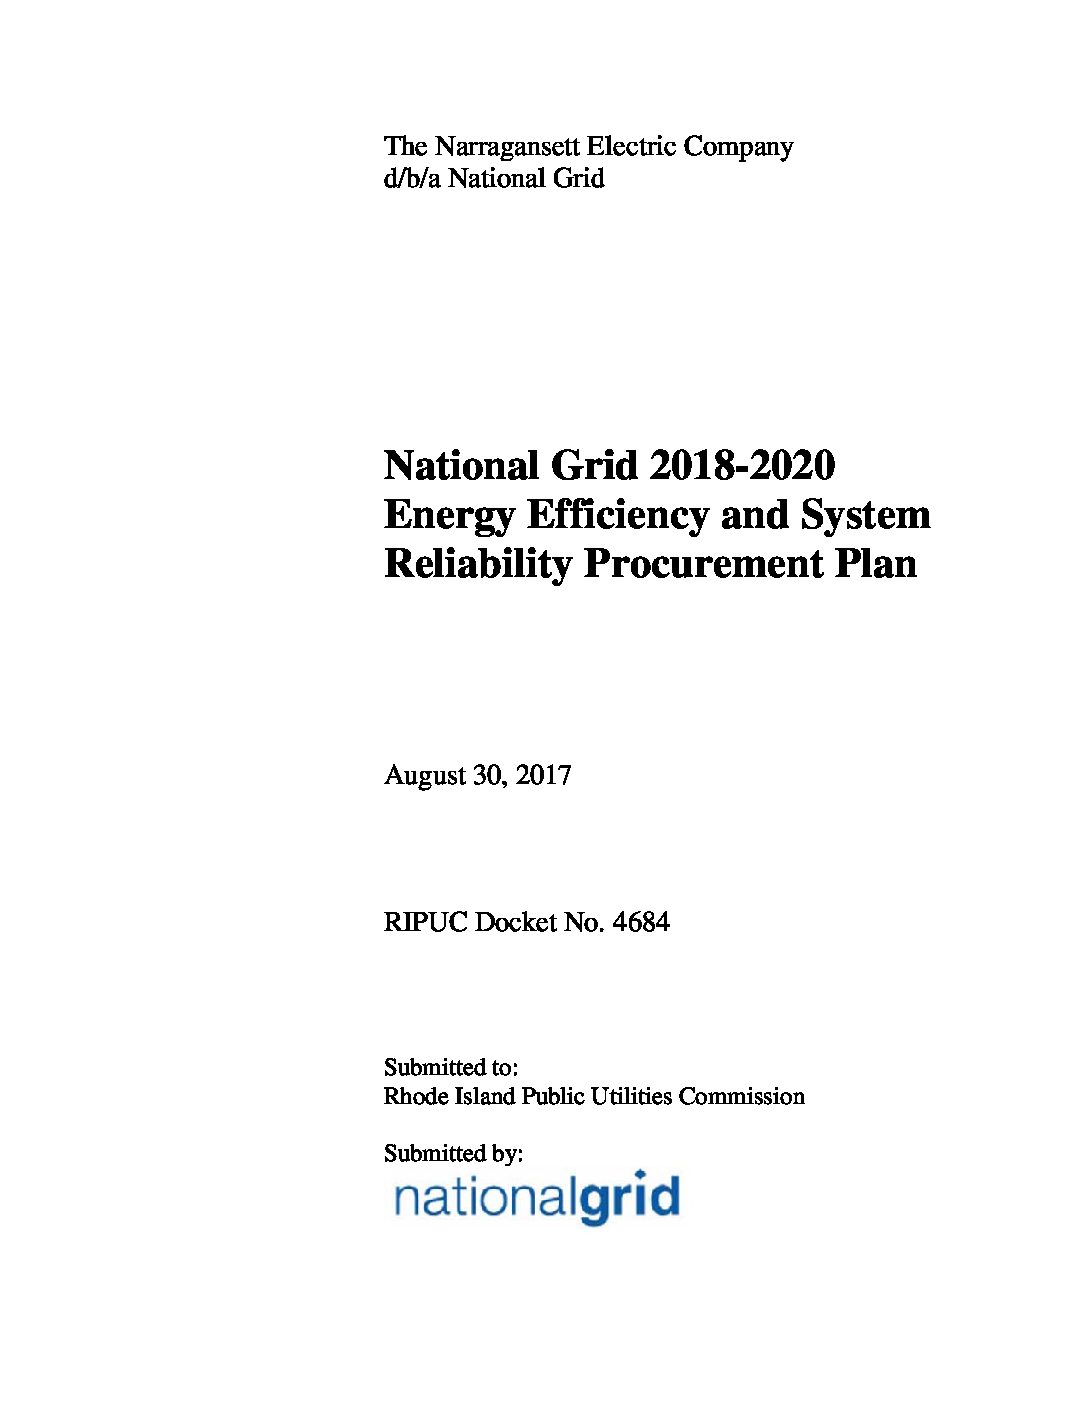 national-grid-2018-2020-energy-efficiency-and-system-reliability